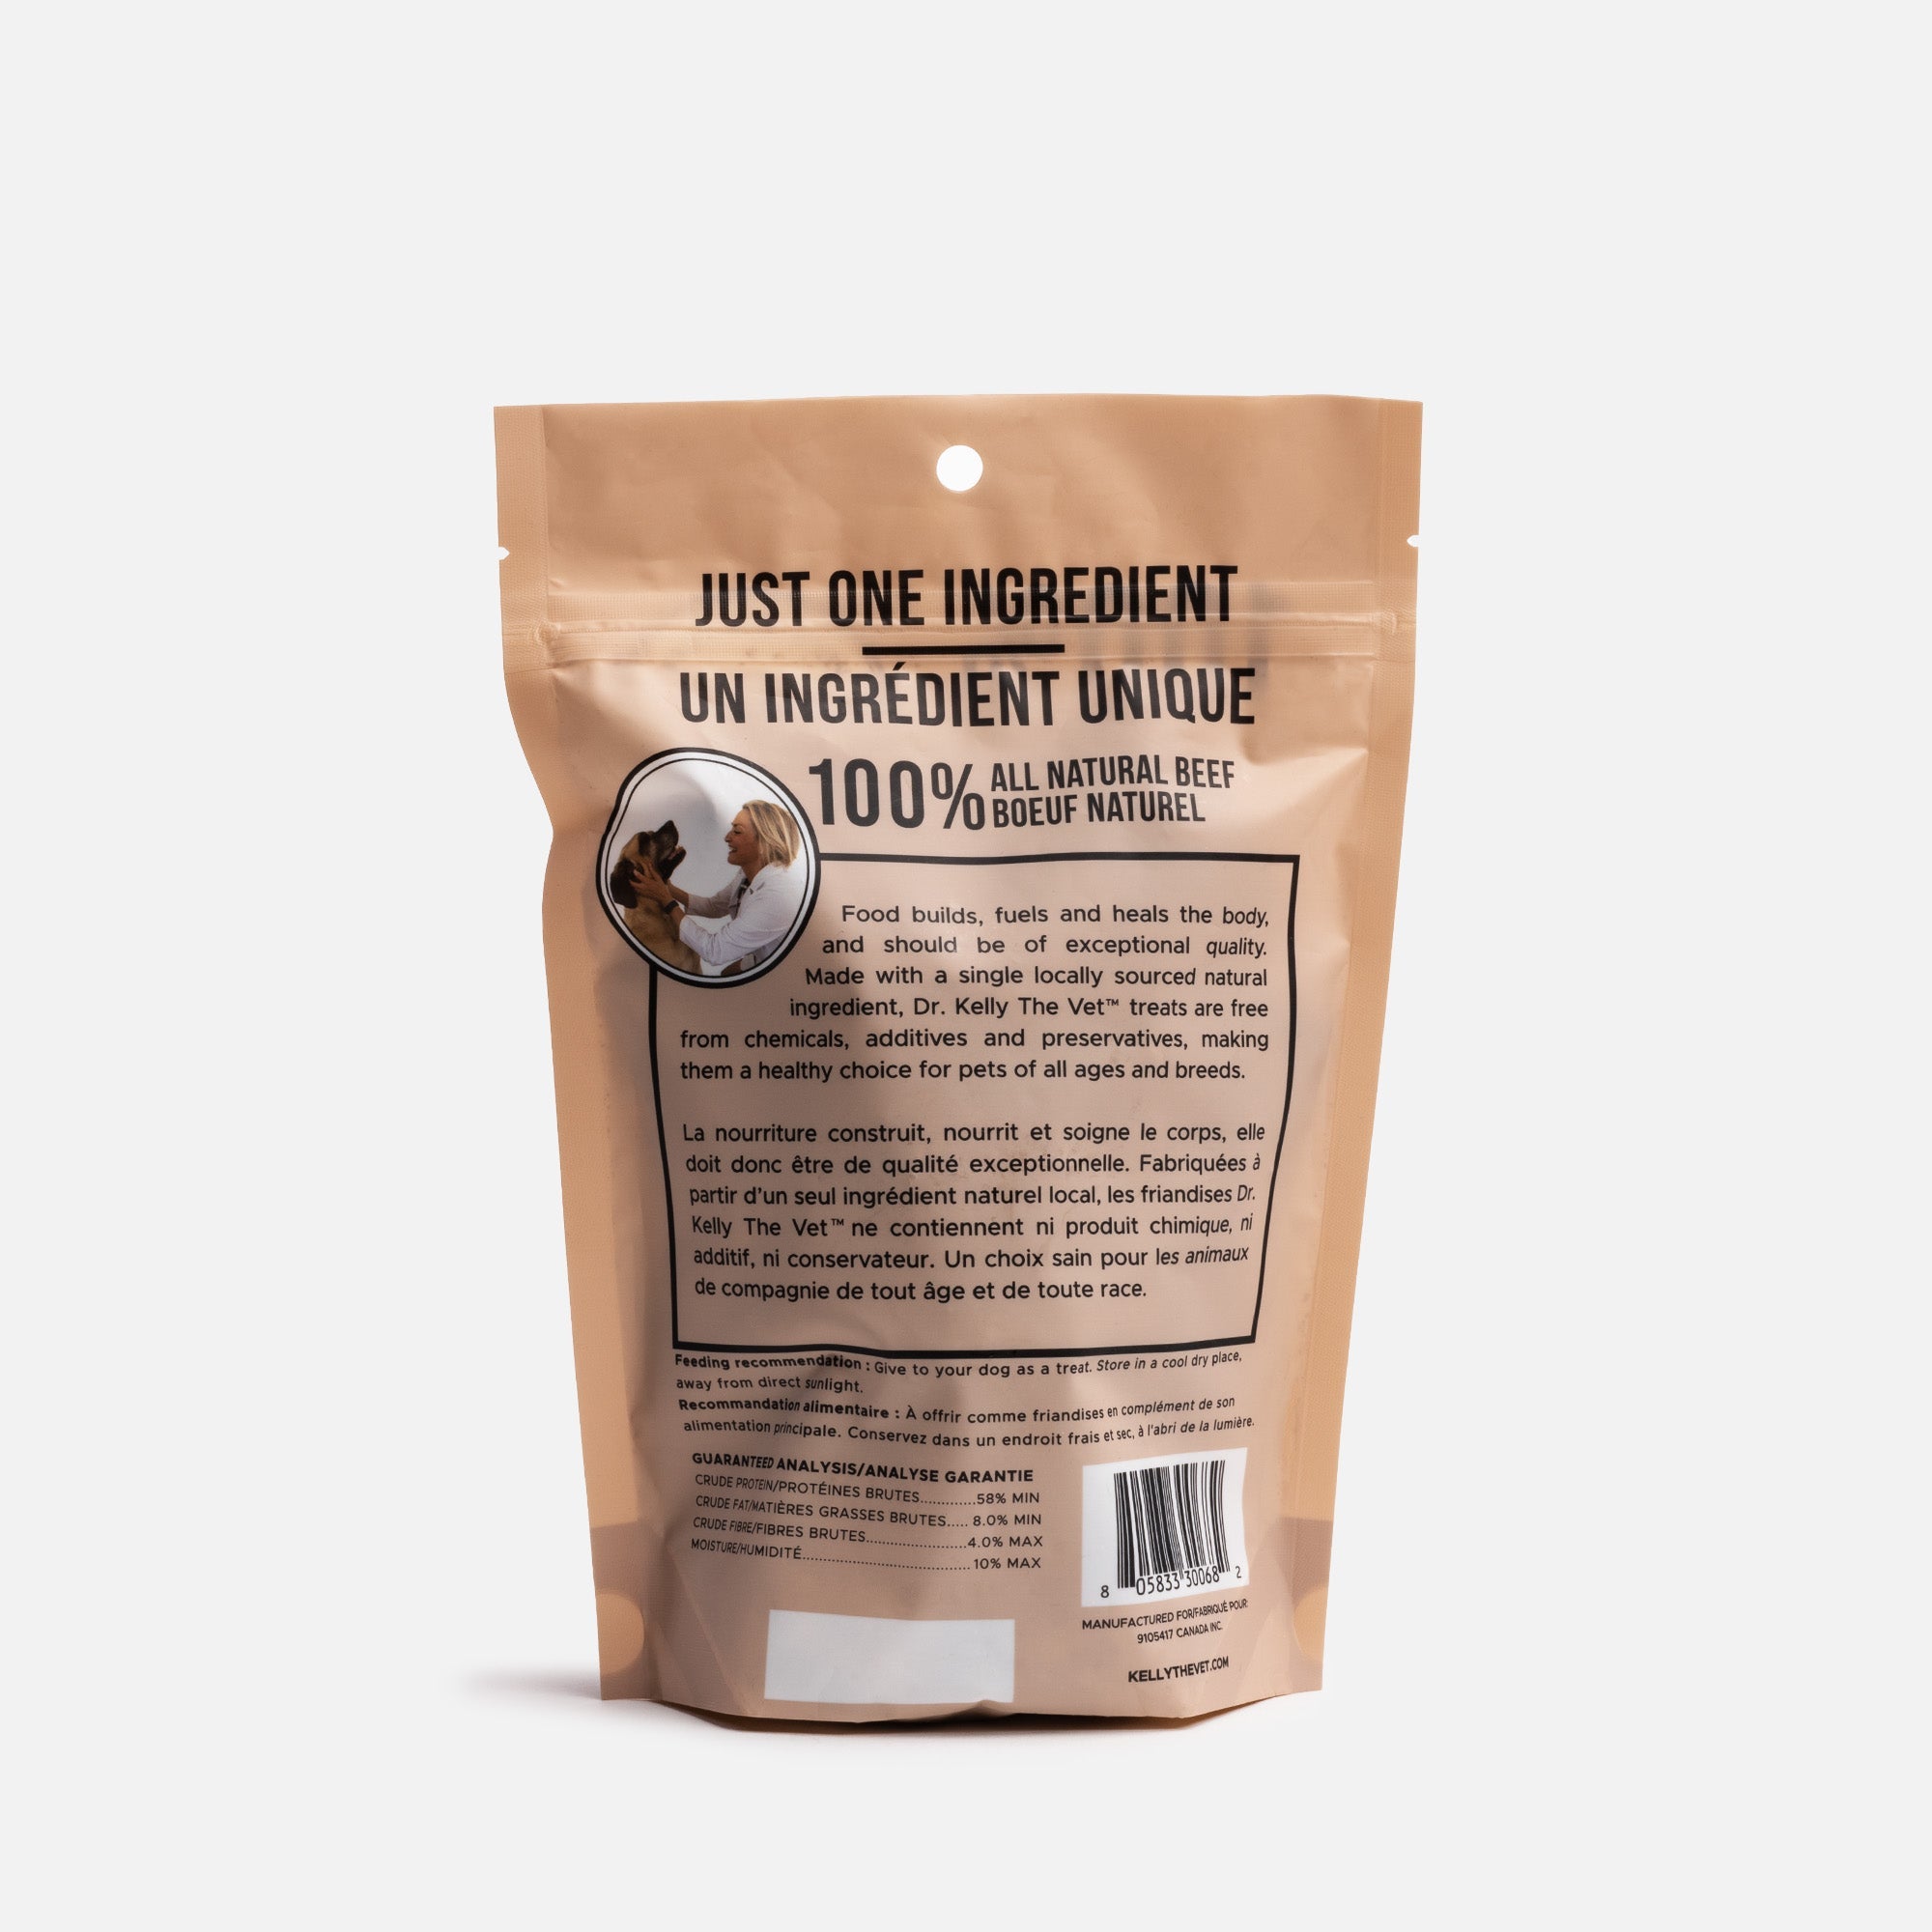 Natural Beef Treats for Dogs - From Dr. Kelly The Vet's kitchen to your pup's bowl.